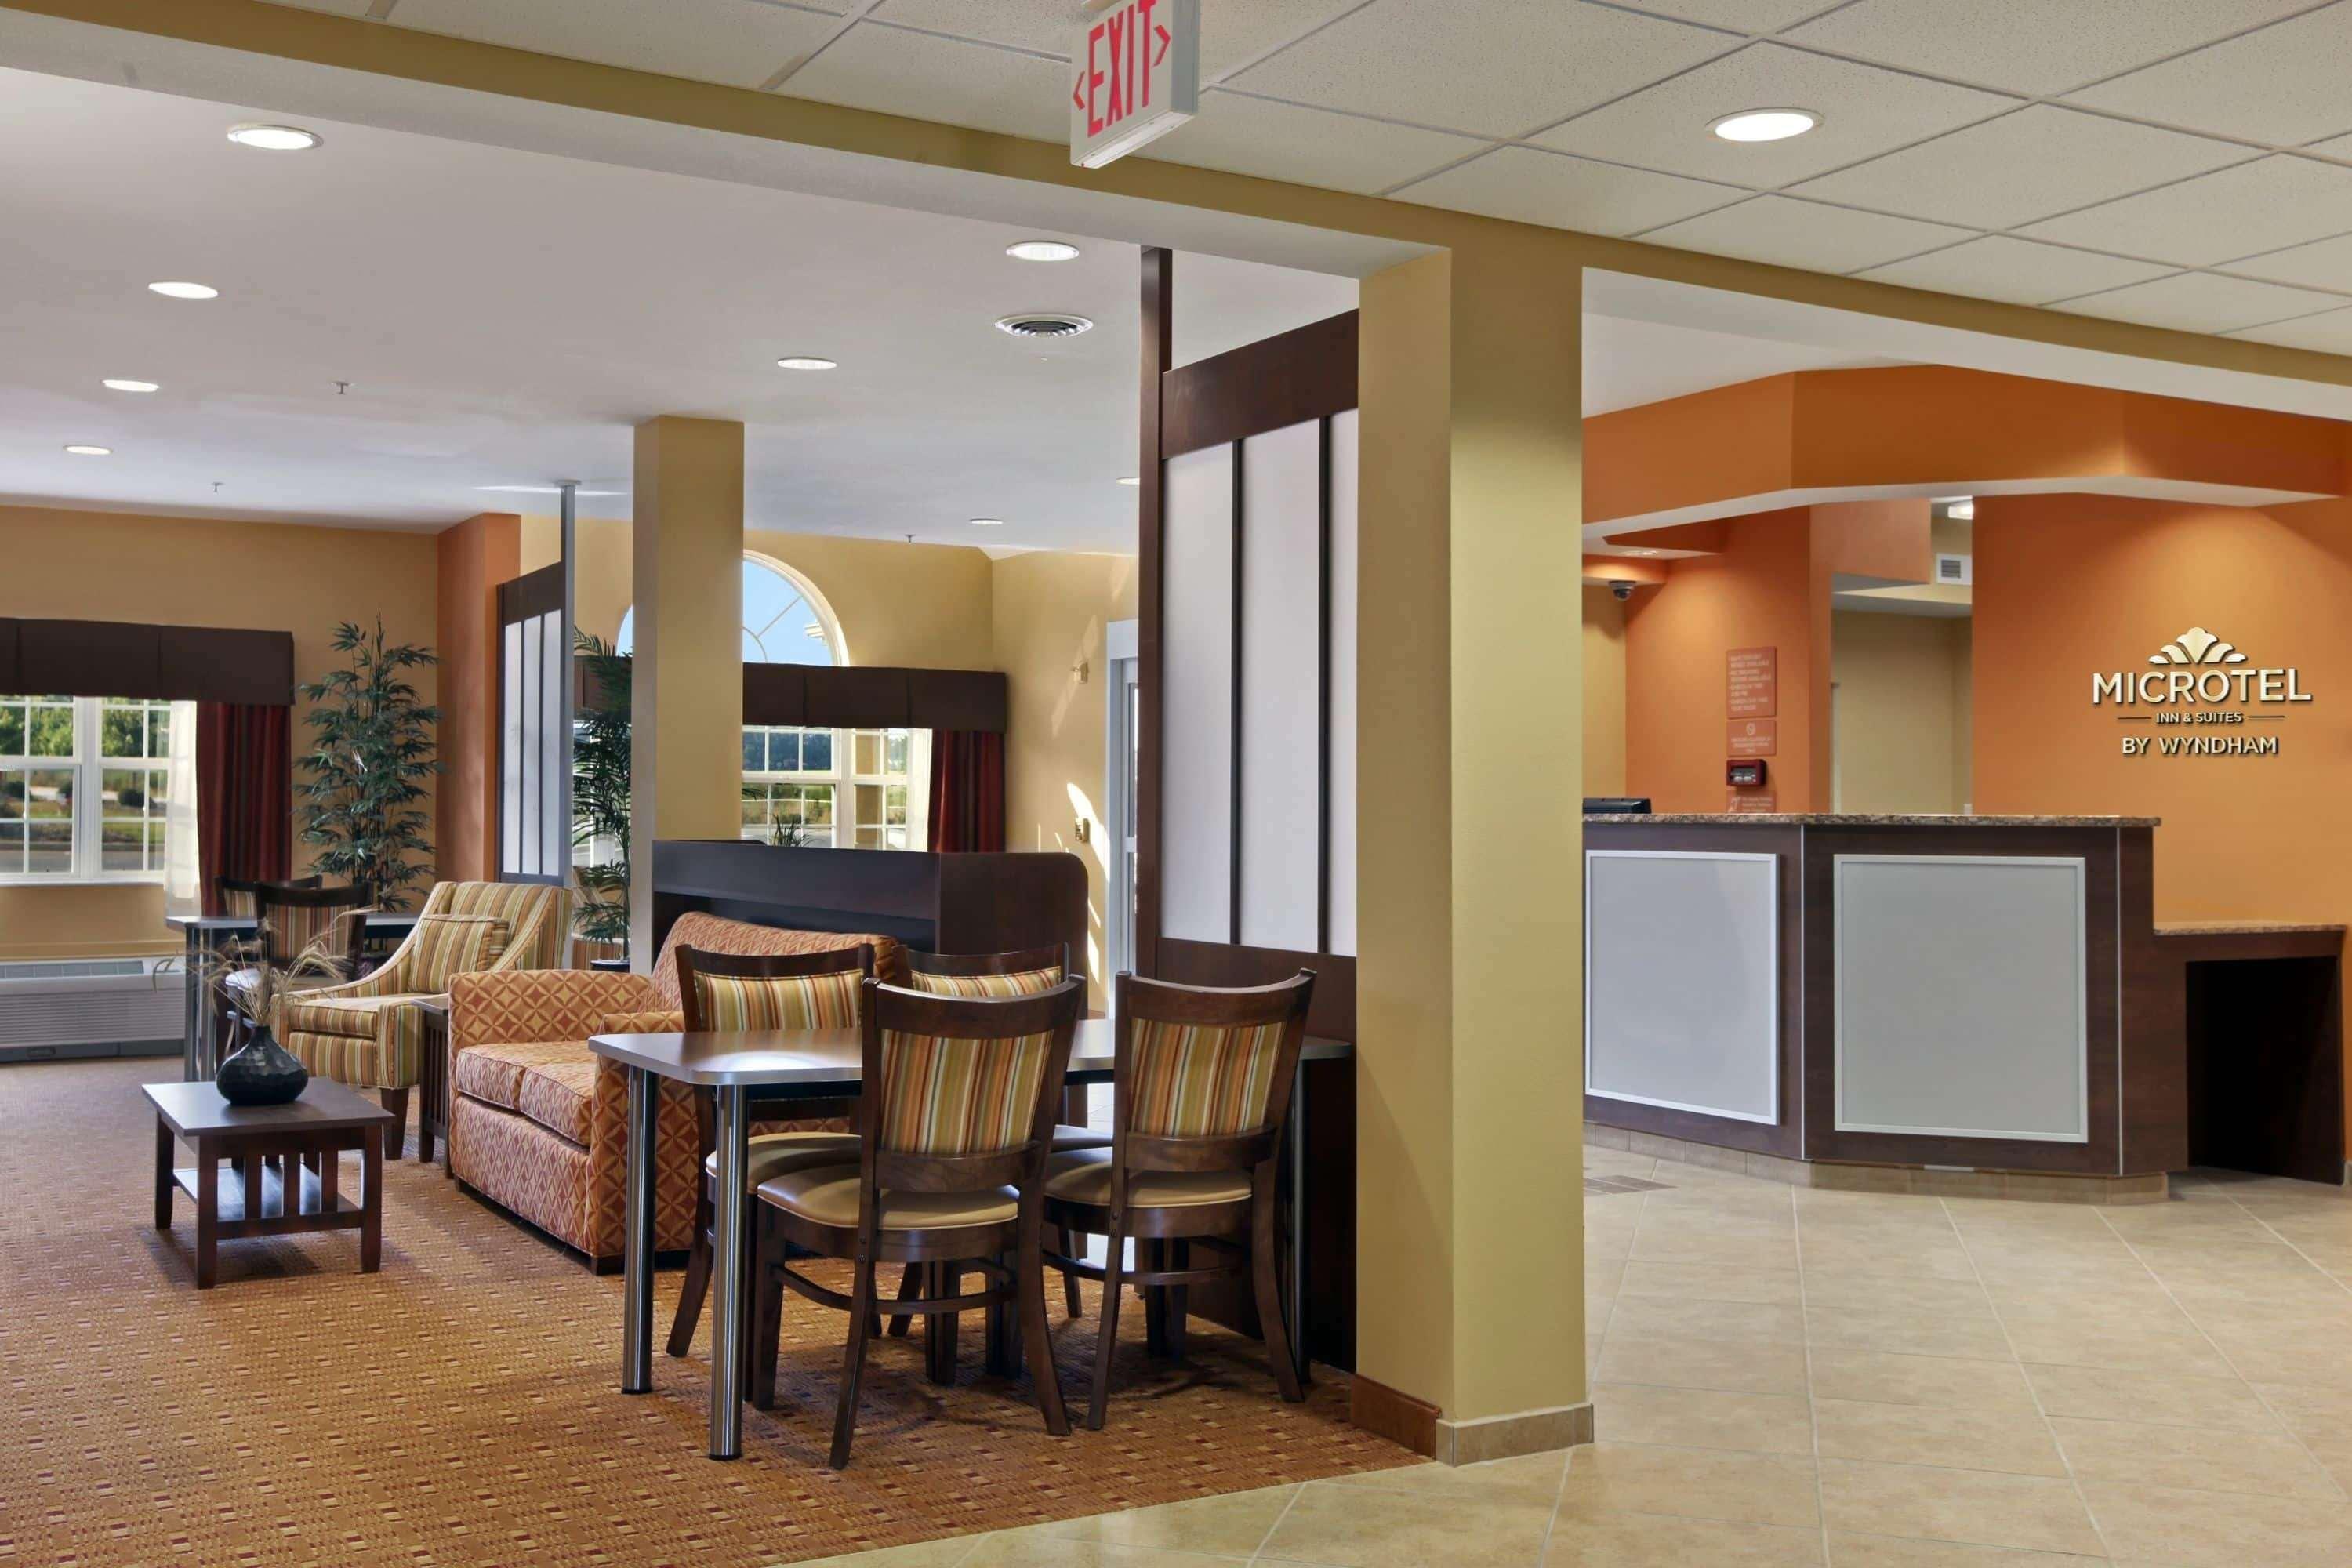 Microtel Inn And Suites By Wyndham Anderson Sc Interior foto